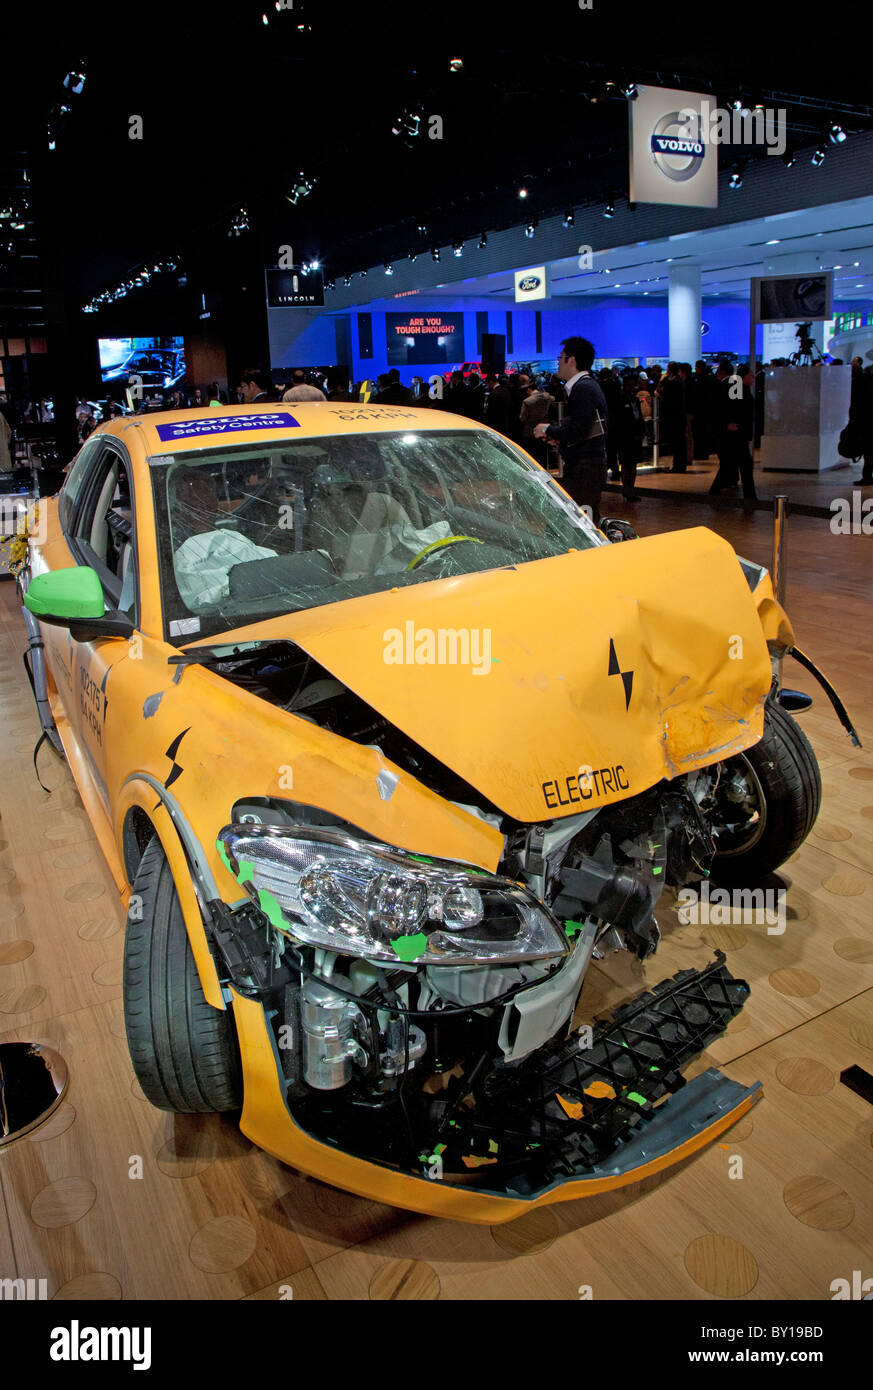 Detroit, Michigan - A crash-tested Volvo C30 electric car on display at the North American International Auto Show. Stock Photo